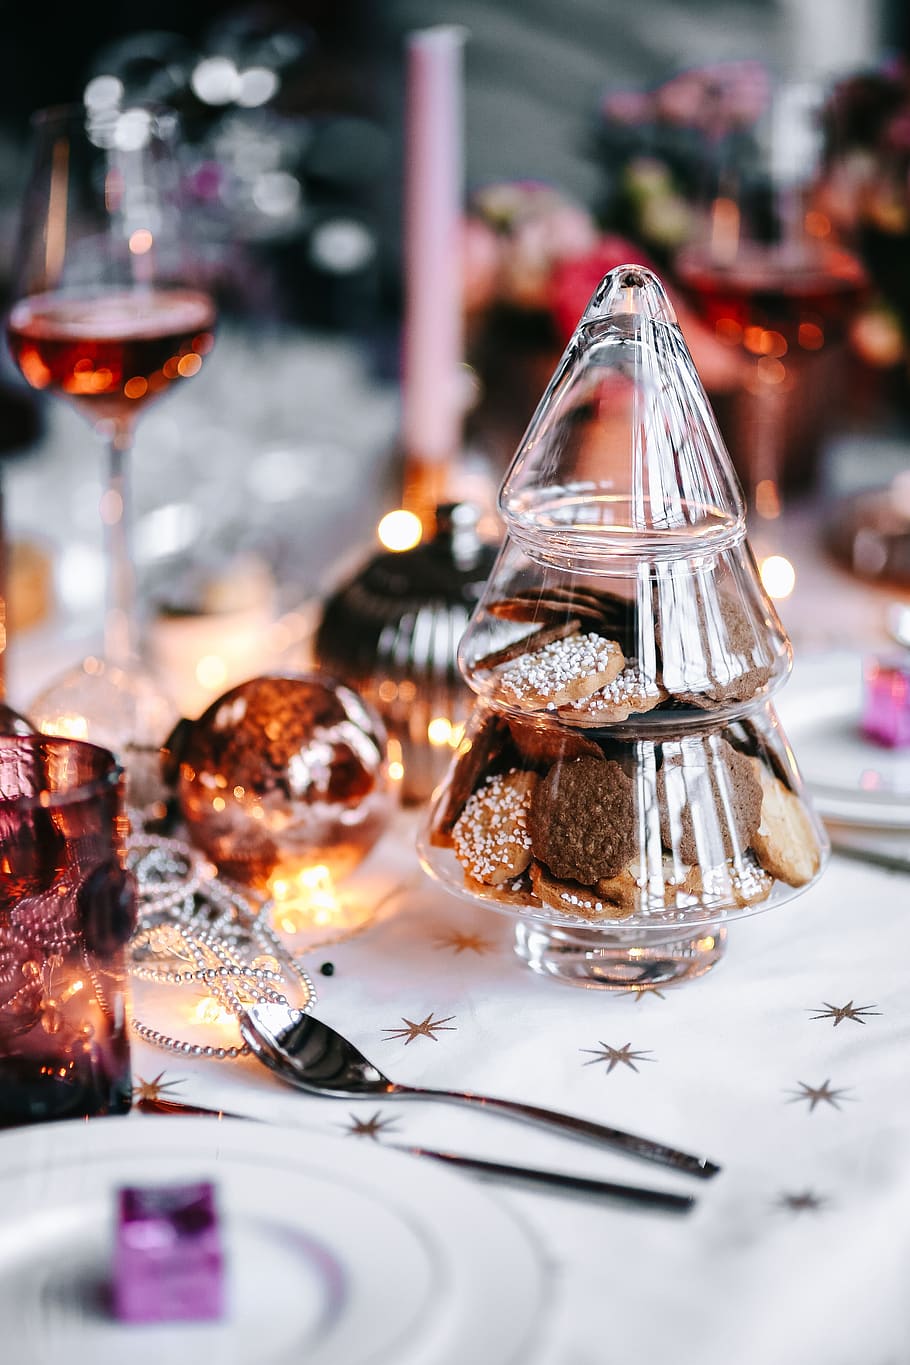 table, decorations, table set, pink, holiday, glamour, xmas, Christmas, food and drink, food